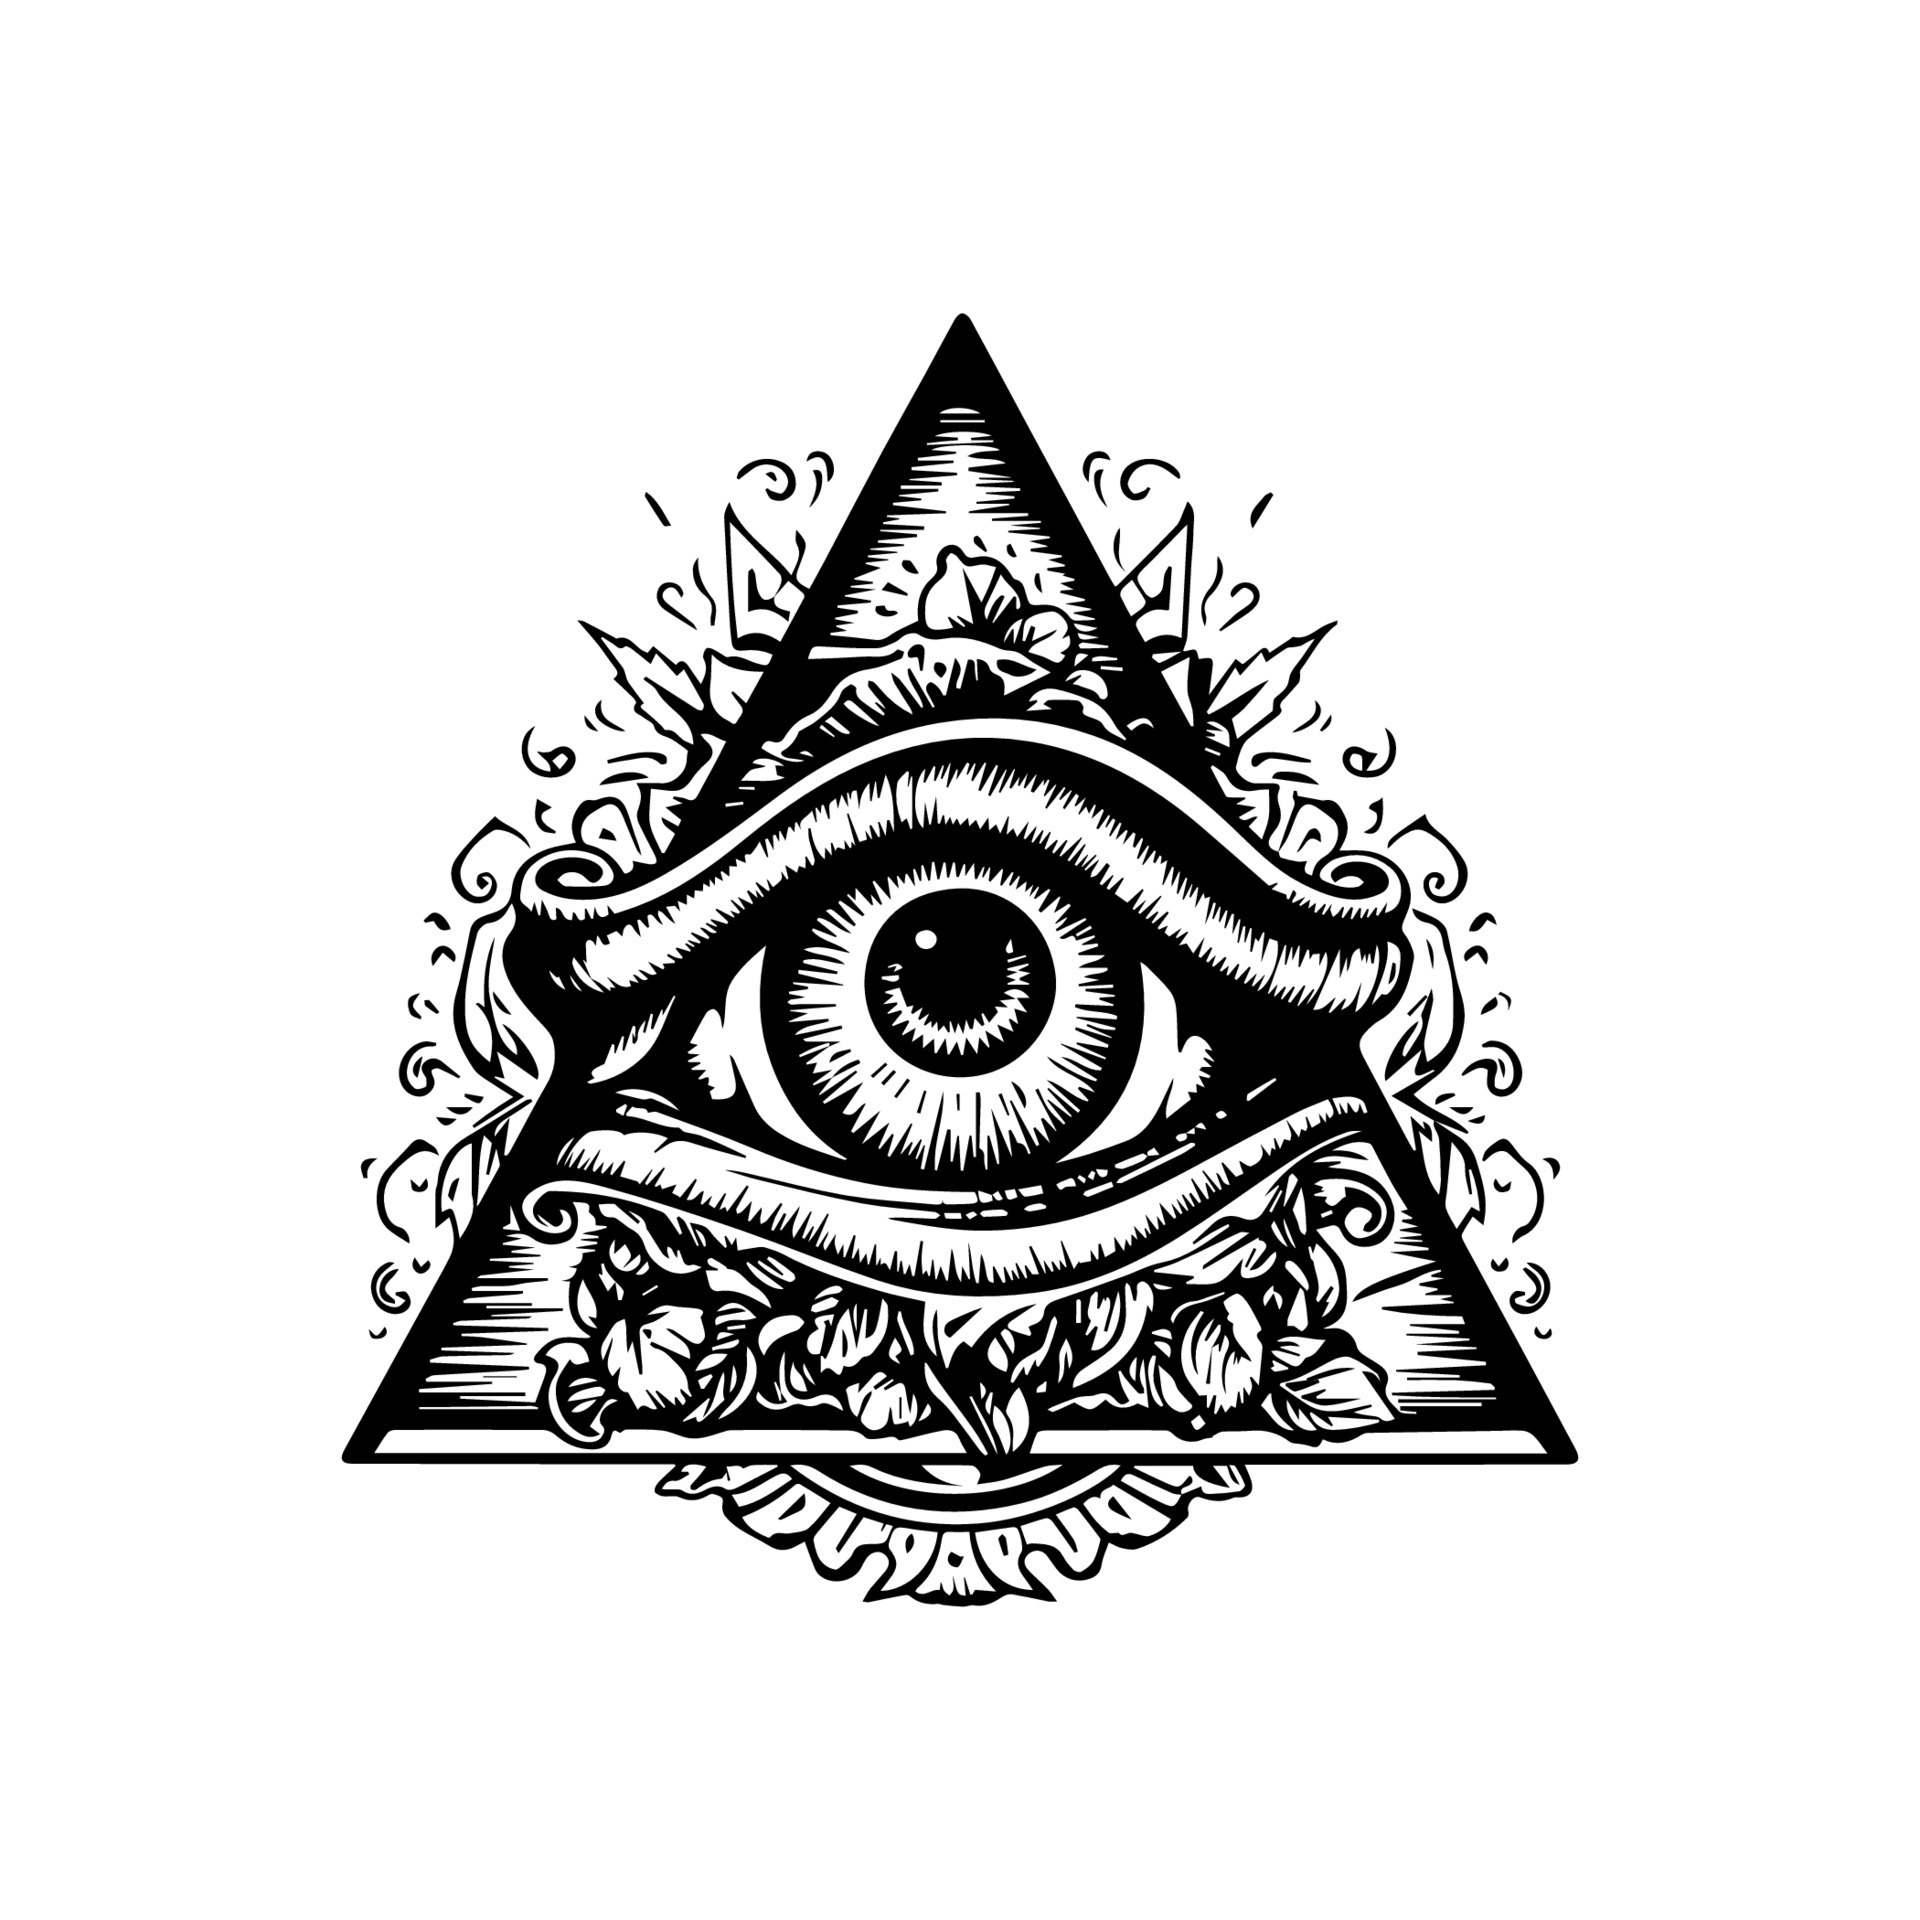 135 Mind-Blowing Pyramid Tattoos And Their Meaning - AuthorityTattoo